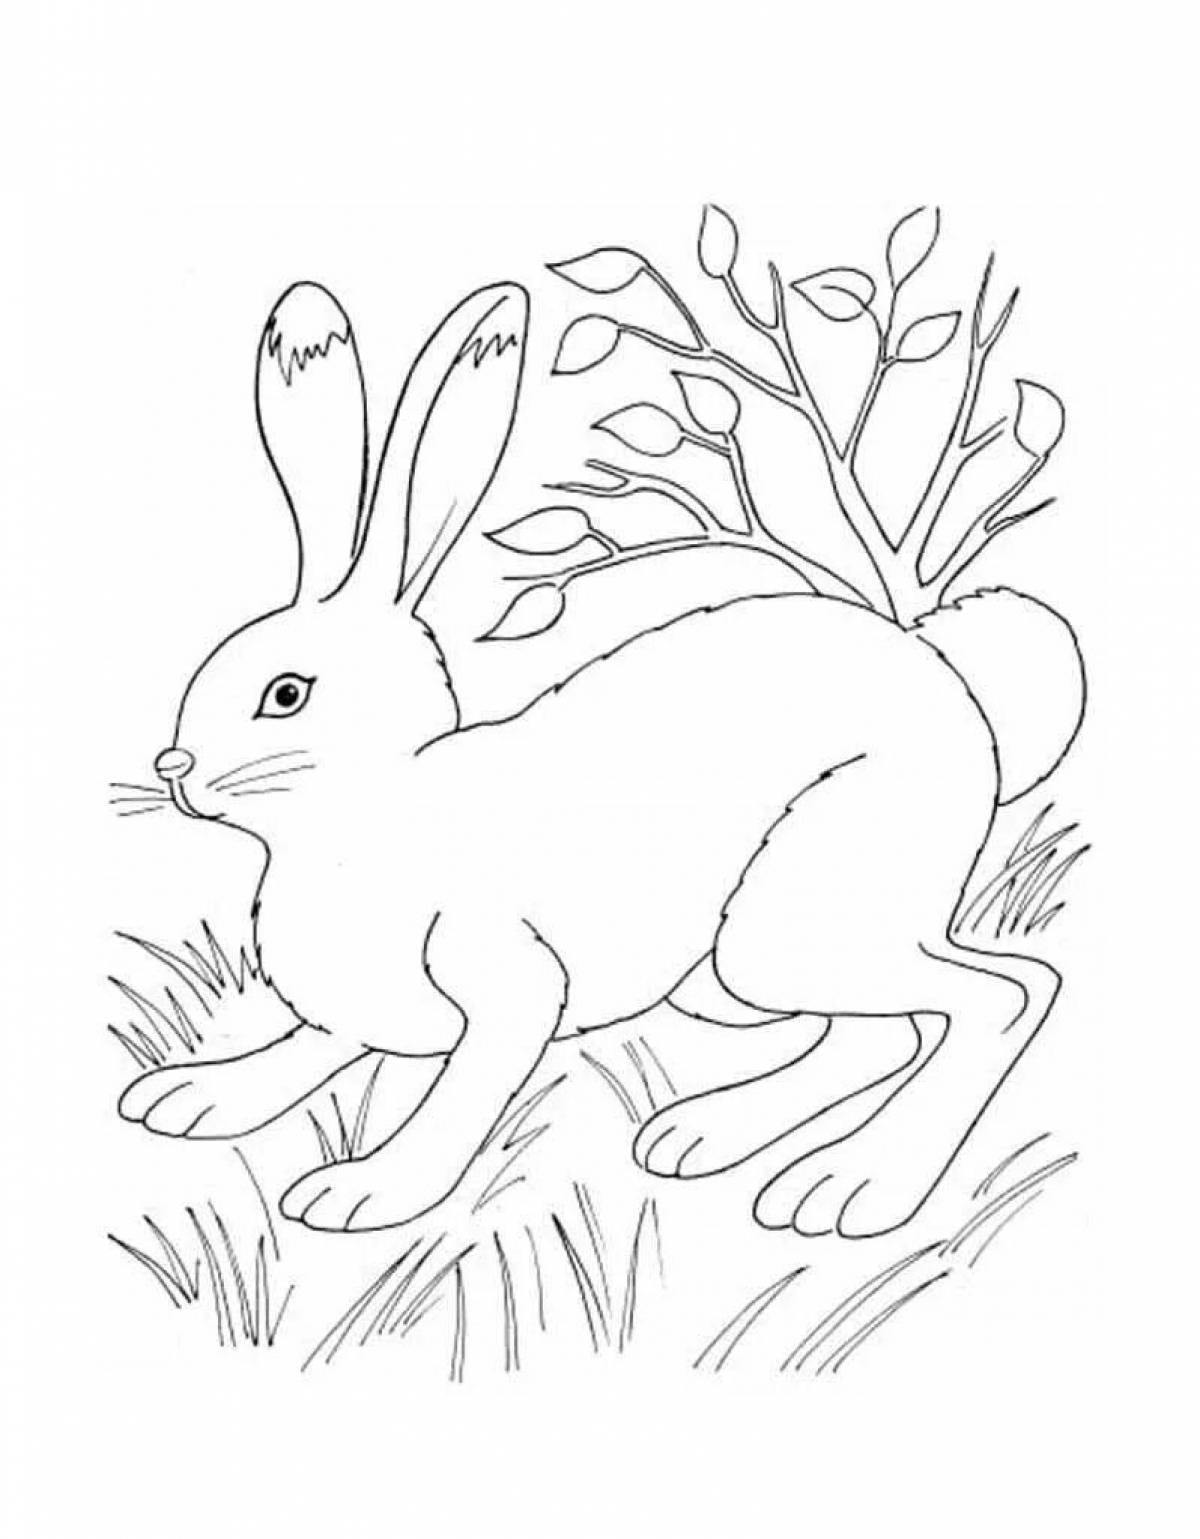 Great forest animal coloring book for kids